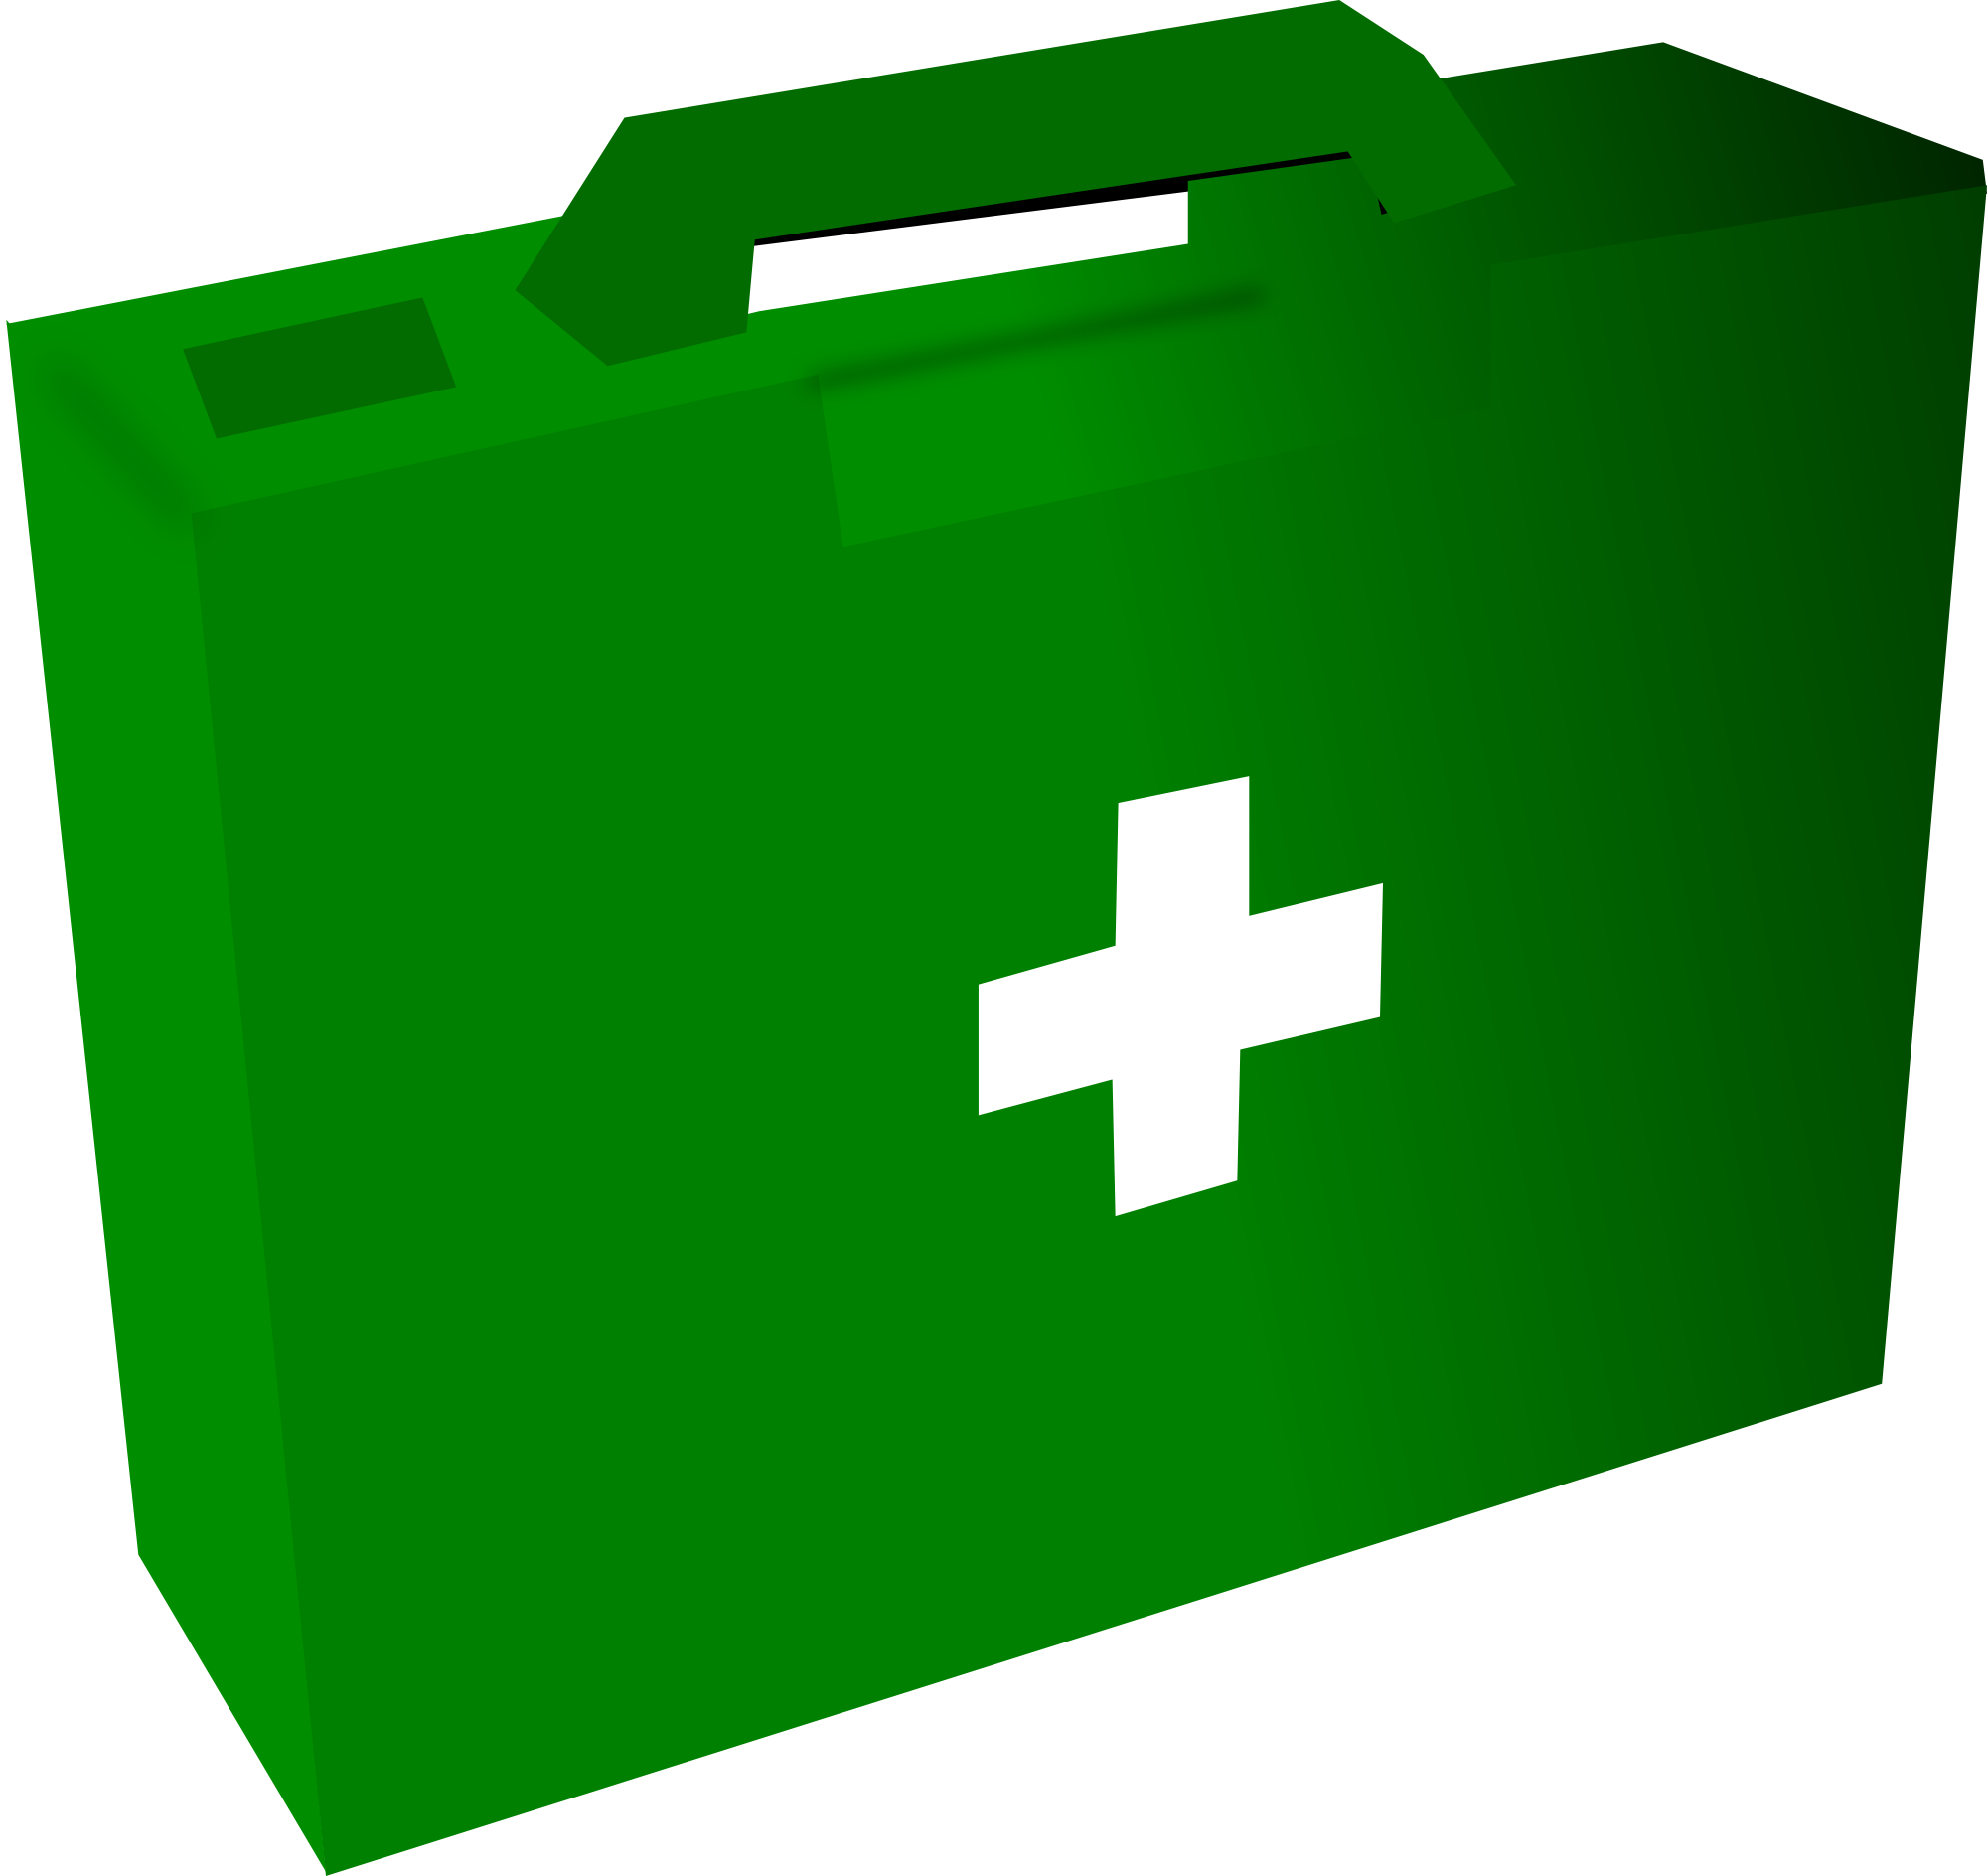 First aid clipart free images at clker vector clip art